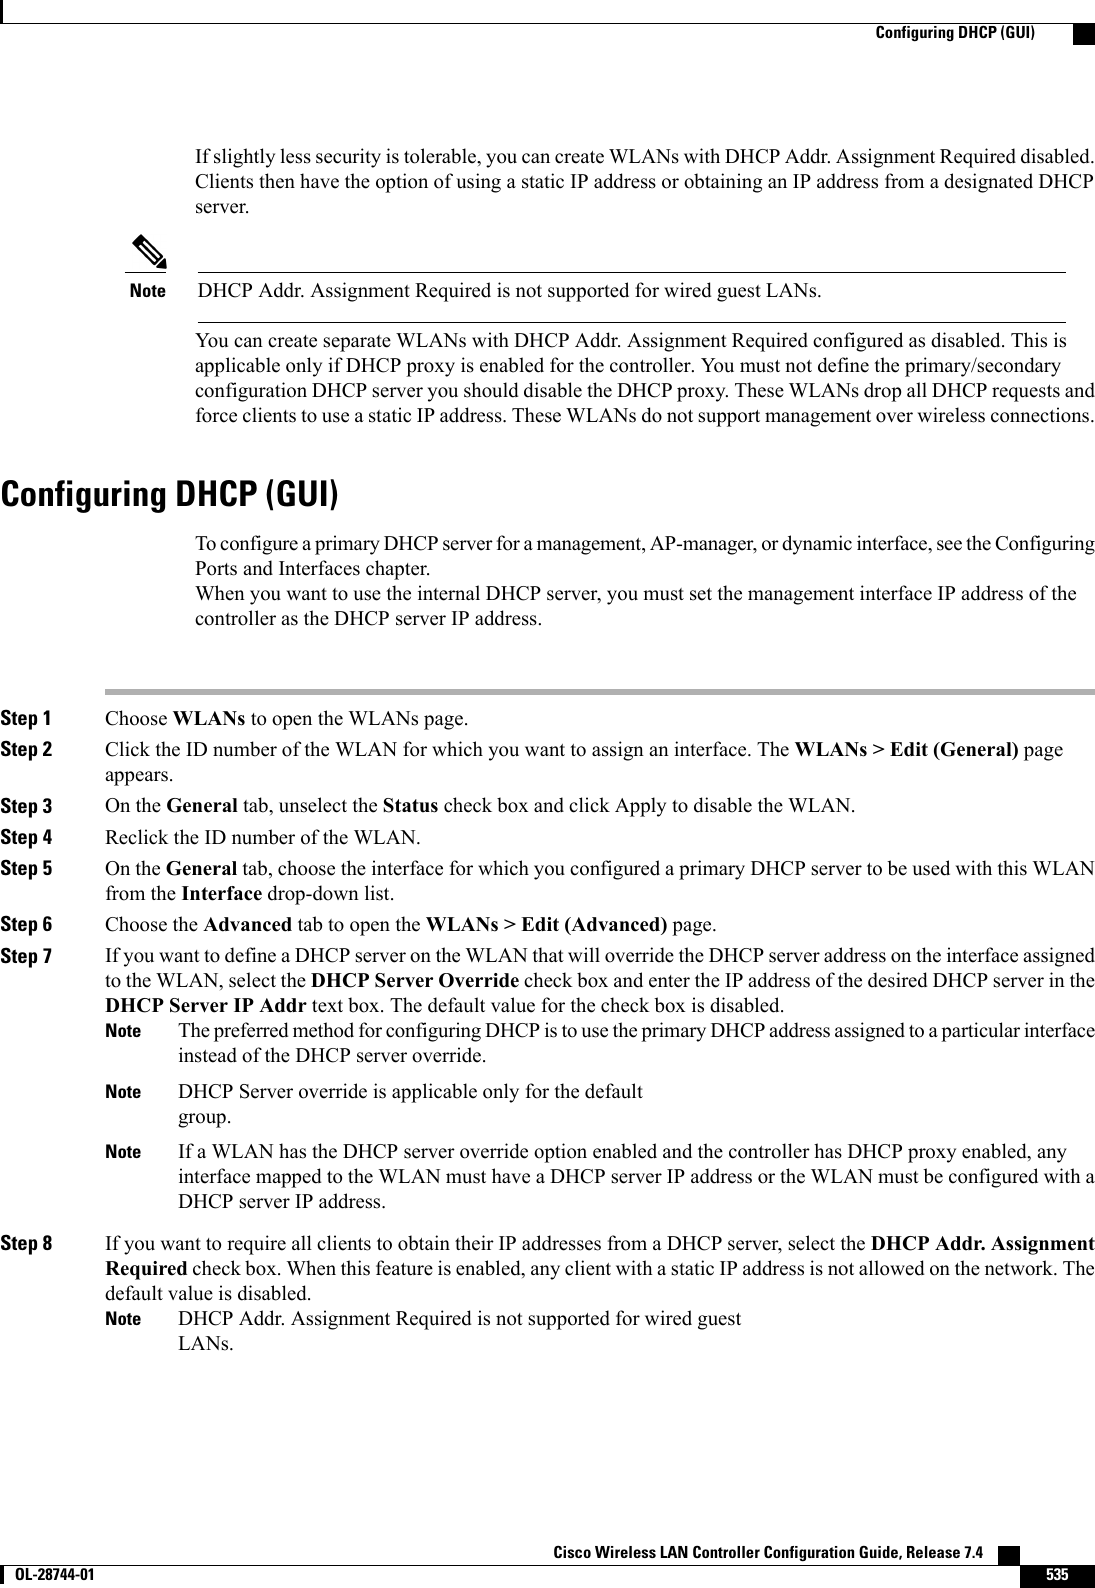 If slightly less security is tolerable, you can create WLANs with DHCP Addr. Assignment Required disabled.Clients then have the option of using a static IP address or obtaining an IP address from a designated DHCPserver.DHCP Addr. Assignment Required is not supported for wired guest LANs.NoteYou can create separate WLANs with DHCP Addr. Assignment Required configured as disabled. This isapplicable only if DHCP proxy is enabled for the controller. You must not define the primary/secondaryconfiguration DHCP server you should disable the DHCP proxy. These WLANs drop all DHCP requests andforce clients to use a static IP address. These WLANs do not support management over wireless connections.Configuring DHCP (GUI)To configure a primary DHCP server for a management, AP-manager, or dynamic interface, see the ConfiguringPorts and Interfaces chapter.When you want to use the internal DHCP server, you must set the management interface IP address of thecontroller as the DHCP server IP address.Step 1 Choose WLANs to open the WLANs page.Step 2 Click the ID number of the WLAN for which you want to assign an interface. The WLANs &gt; Edit (General) pageappears.Step 3 On the General tab, unselect the Status check box and click Apply to disable the WLAN.Step 4 Reclick the ID number of the WLAN.Step 5 On the General tab, choose the interface for which you configured a primary DHCP server to be used with this WLANfrom the Interface drop-down list.Step 6 Choose the Advanced tab to open the WLANs &gt; Edit (Advanced) page.Step 7 If you want to define a DHCP server on the WLAN that will override the DHCP server address on the interface assignedto the WLAN, select the DHCP Server Override check box and enter the IP address of the desired DHCP server in theDHCP Server IP Addr text box. The default value for the check box is disabled.The preferred method for configuring DHCP is to use the primary DHCP address assigned to a particular interfaceinstead of the DHCP server override.NoteDHCP Server override is applicable only for the defaultgroup.NoteIf a WLAN has the DHCP server override option enabled and the controller has DHCP proxy enabled, anyinterface mapped to the WLAN must have a DHCP server IP address or the WLAN must be configured with aDHCP server IP address.NoteStep 8 If you want to require all clients to obtain their IP addresses from a DHCP server, select the DHCP Addr. AssignmentRequired check box. When this feature is enabled, any client with a static IP address is not allowed on the network. Thedefault value is disabled.DHCP Addr. Assignment Required is not supported for wired guestLANs.NoteCisco Wireless LAN Controller Configuration Guide, Release 7.4       OL-28744-01 535Configuring DHCP (GUI)